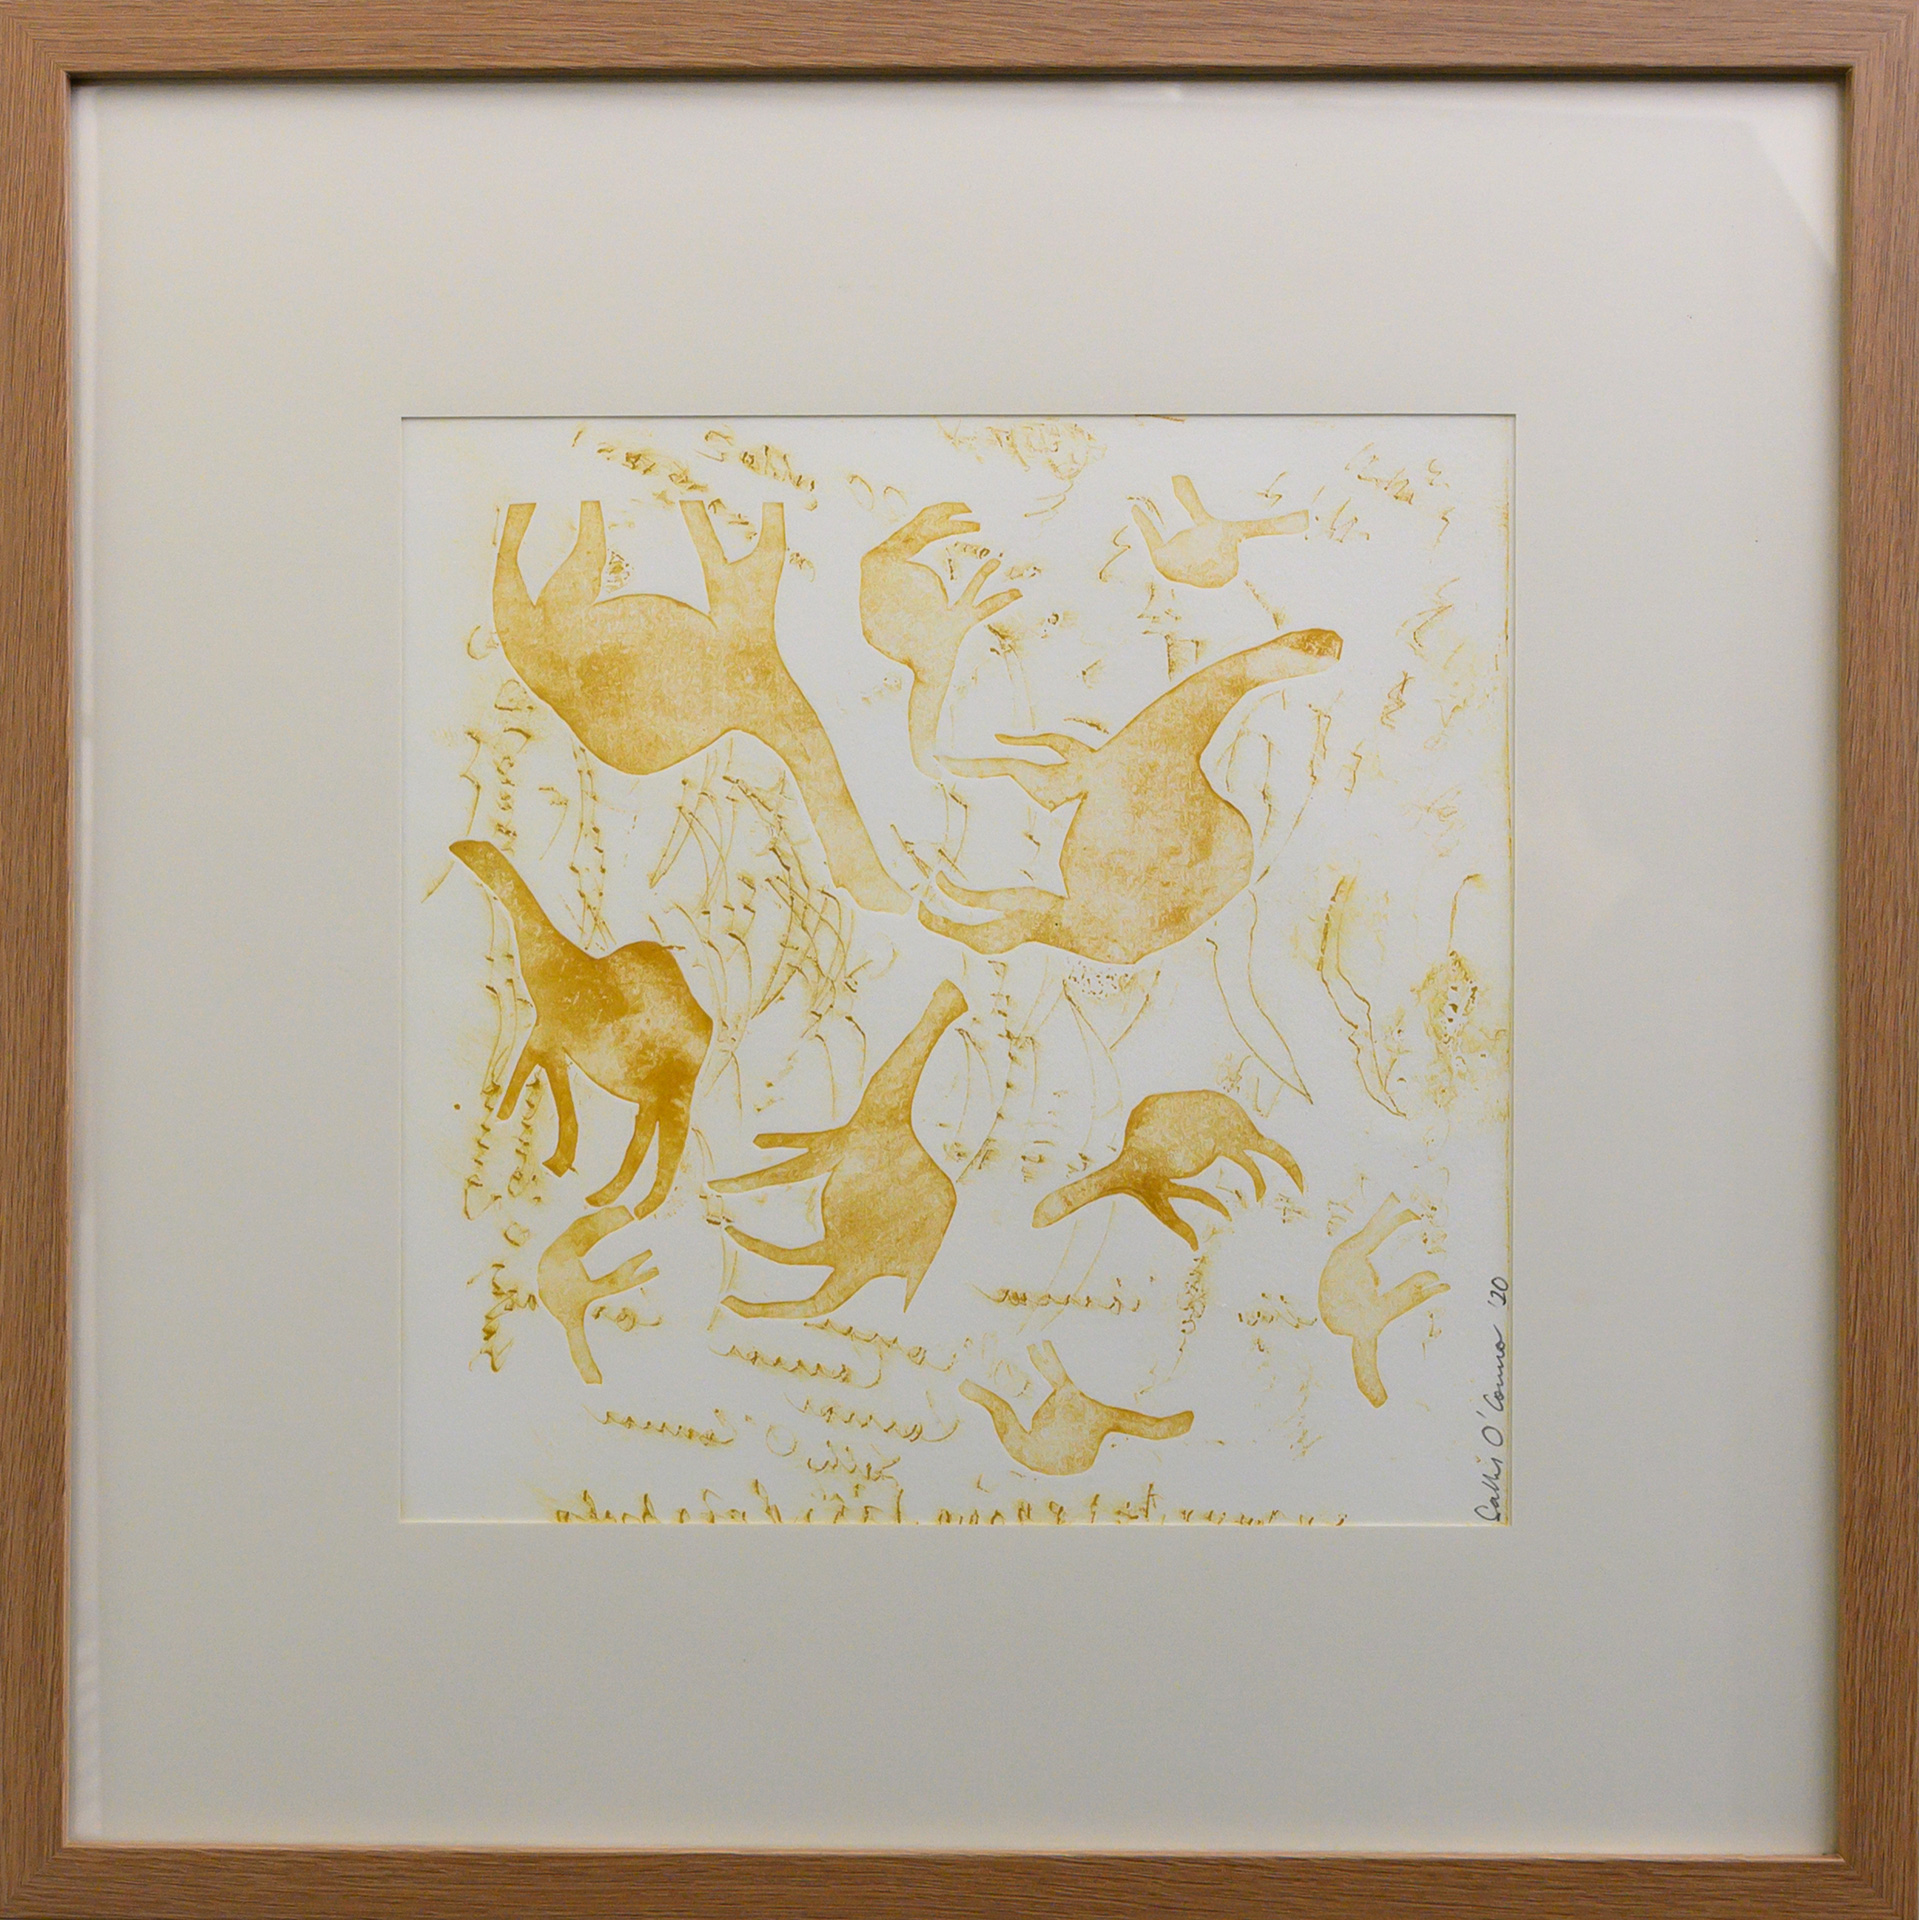 Framed artwork by Sally OConnor of simplistic yellow camels